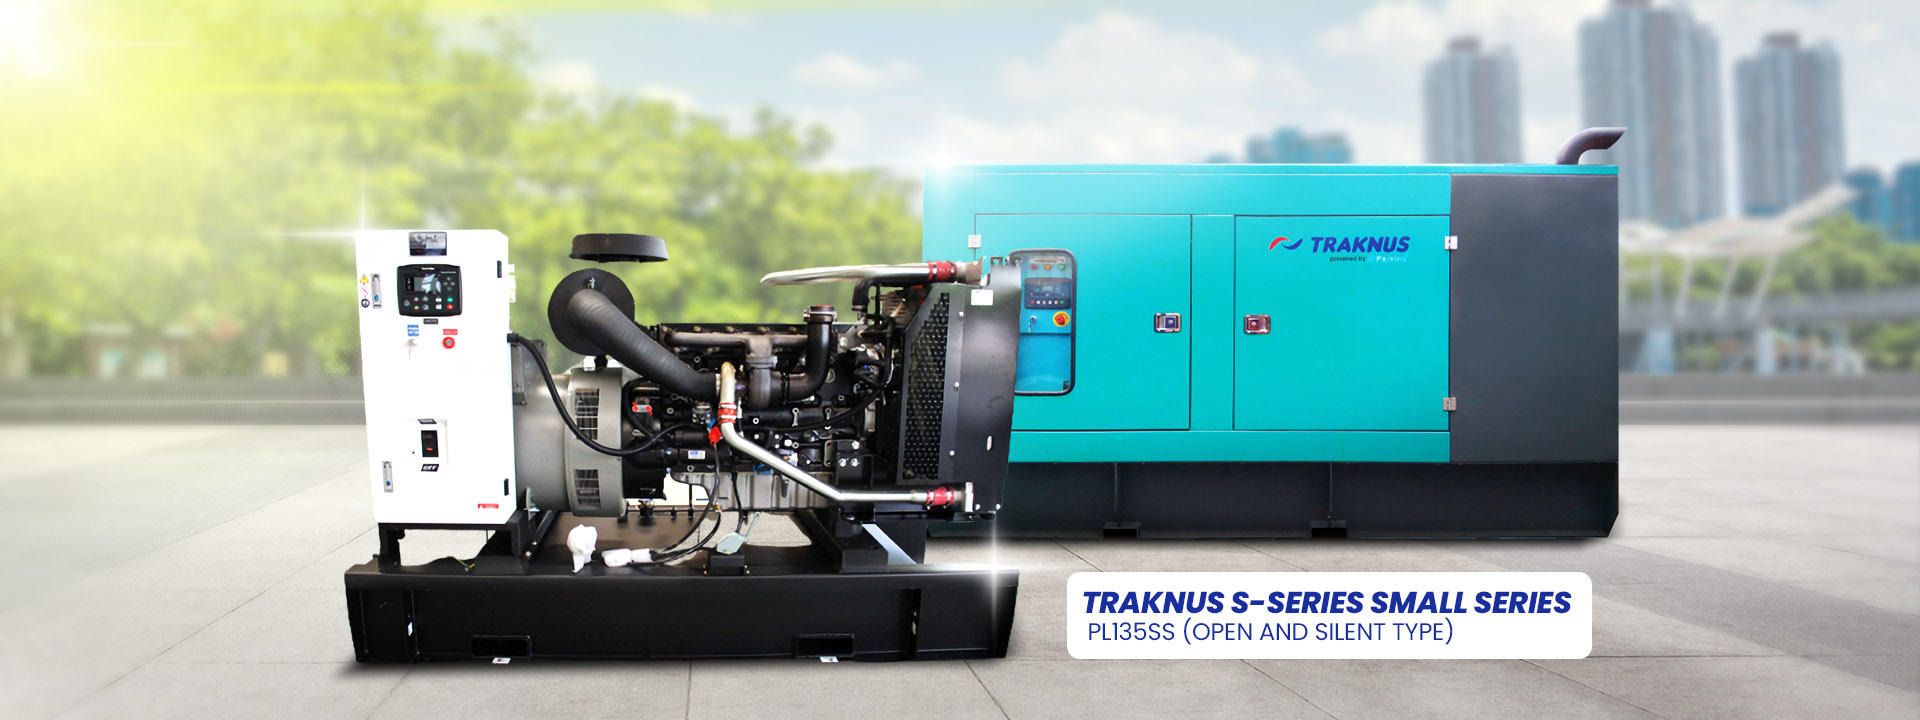 Traknus s series small series pl135ss open and silent type